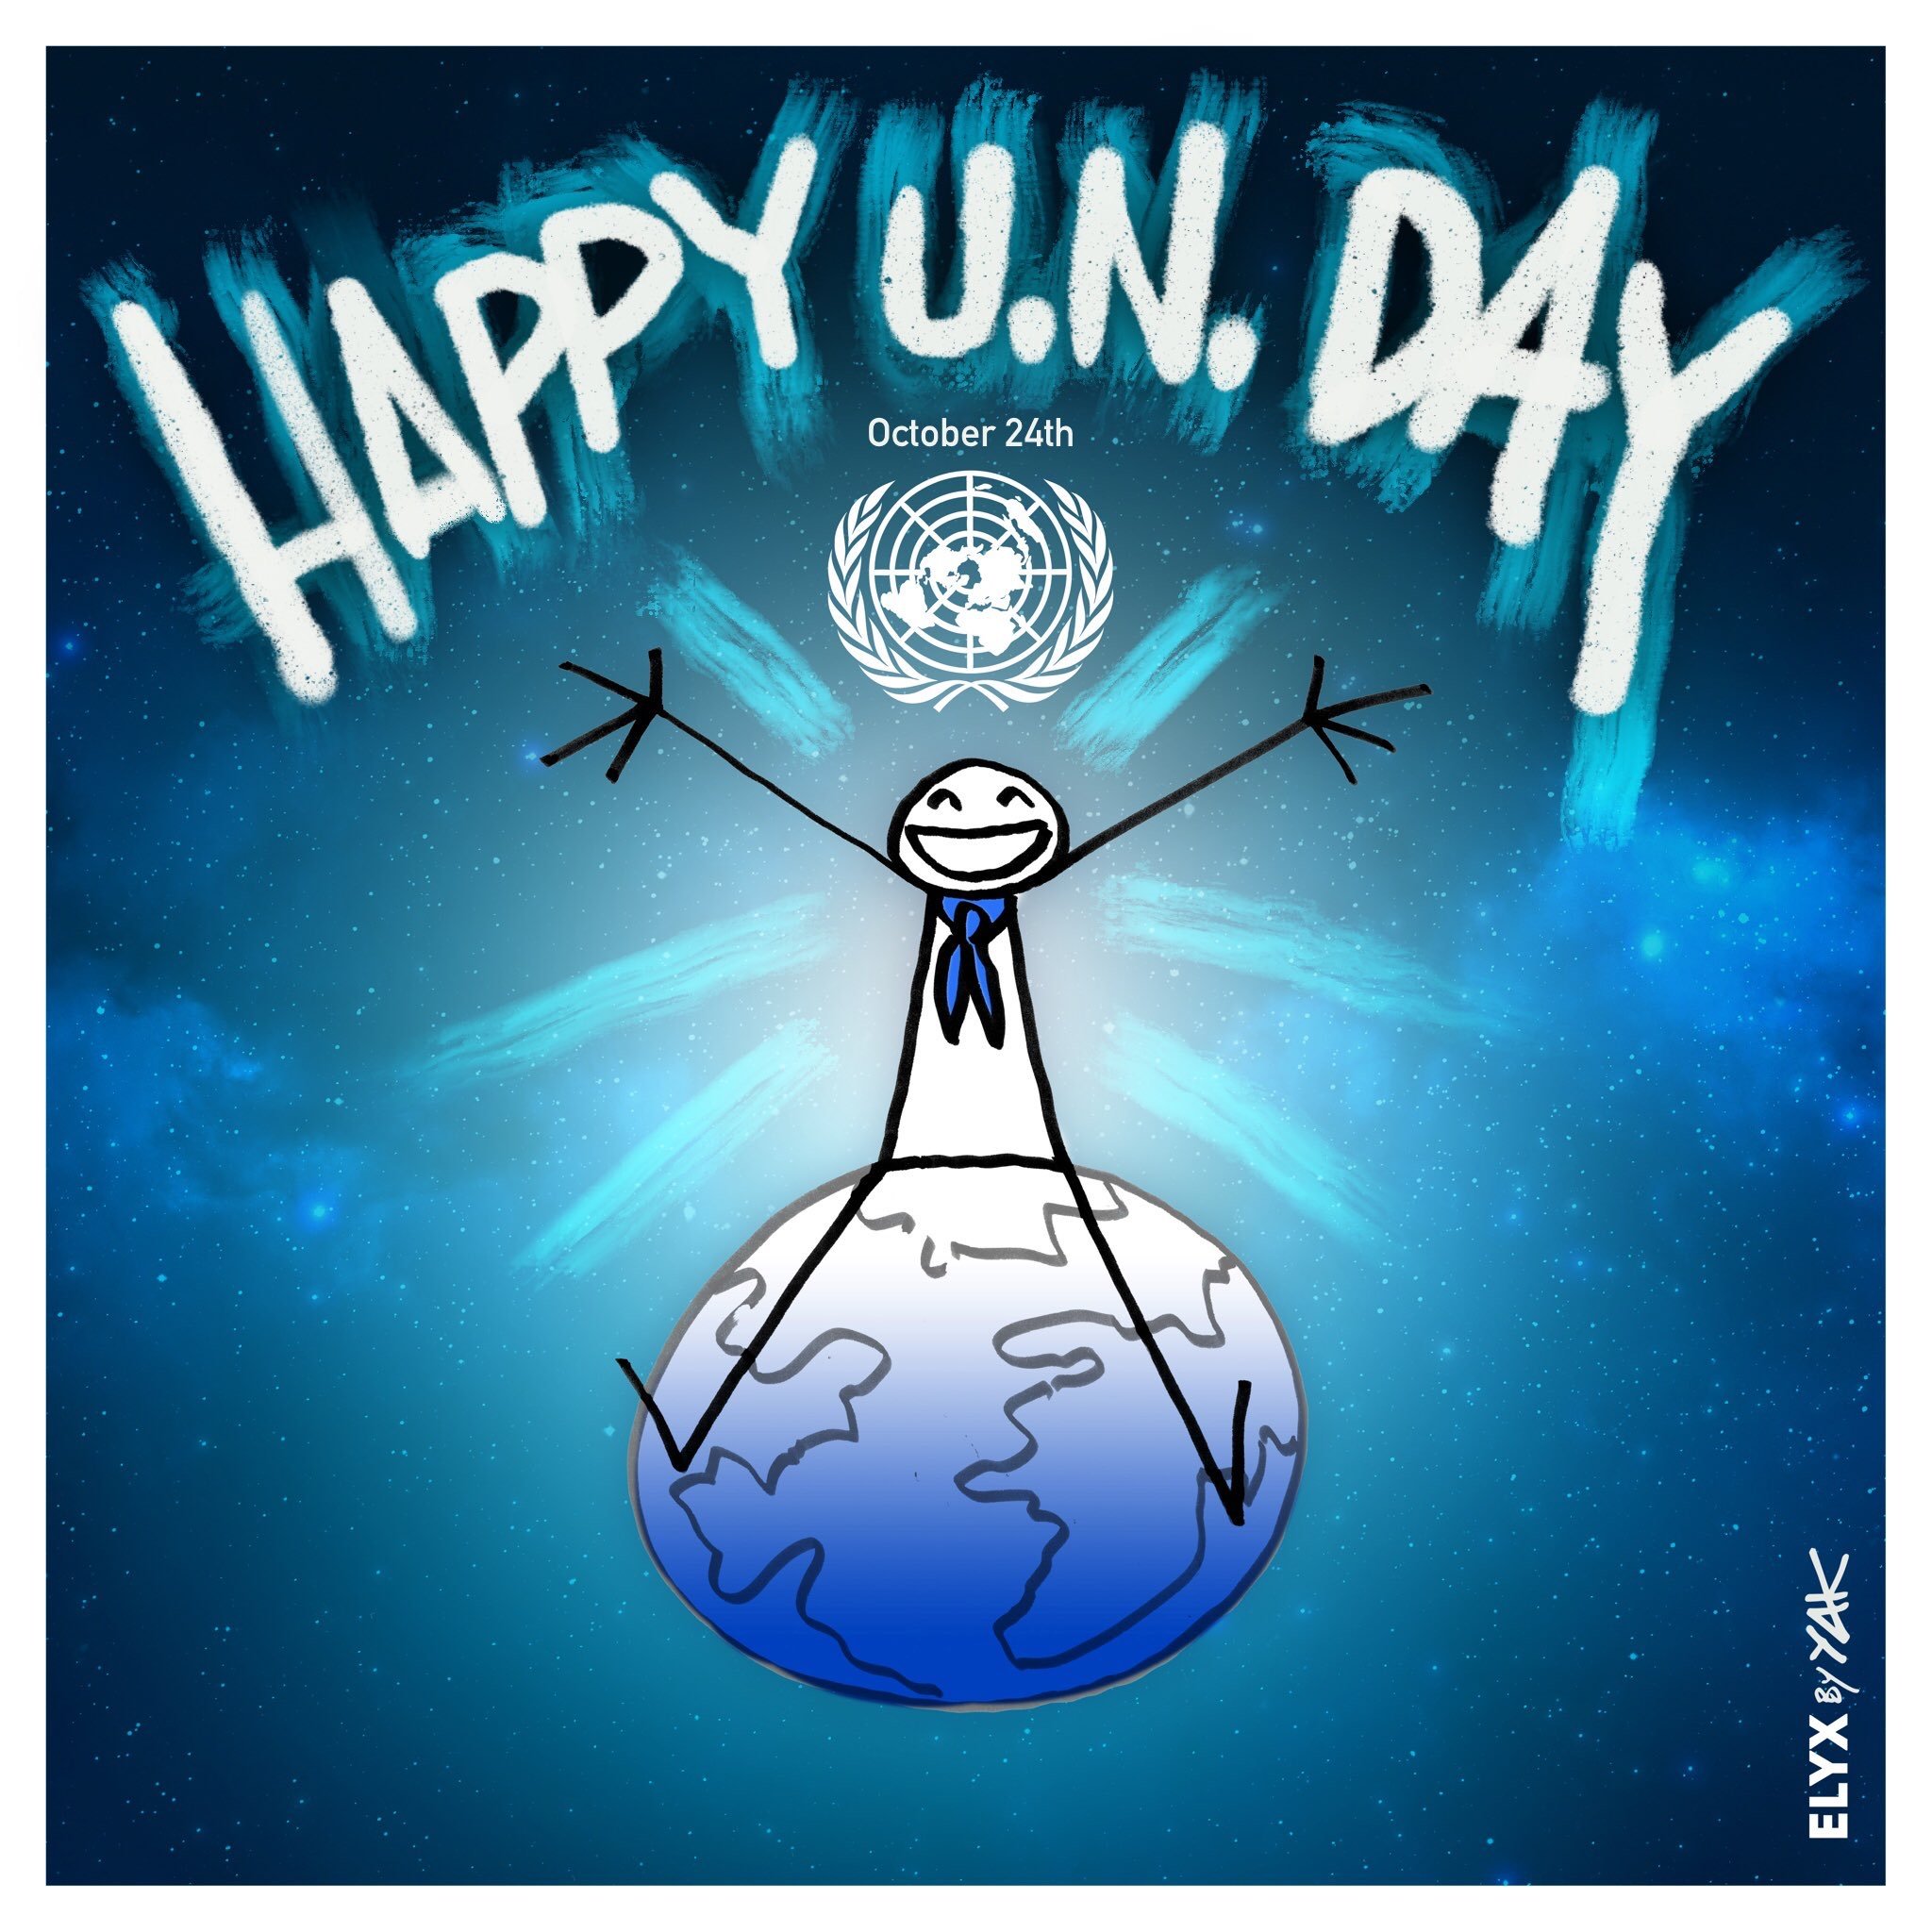 United Nations  Peace, dignity and equality on a healthy planet